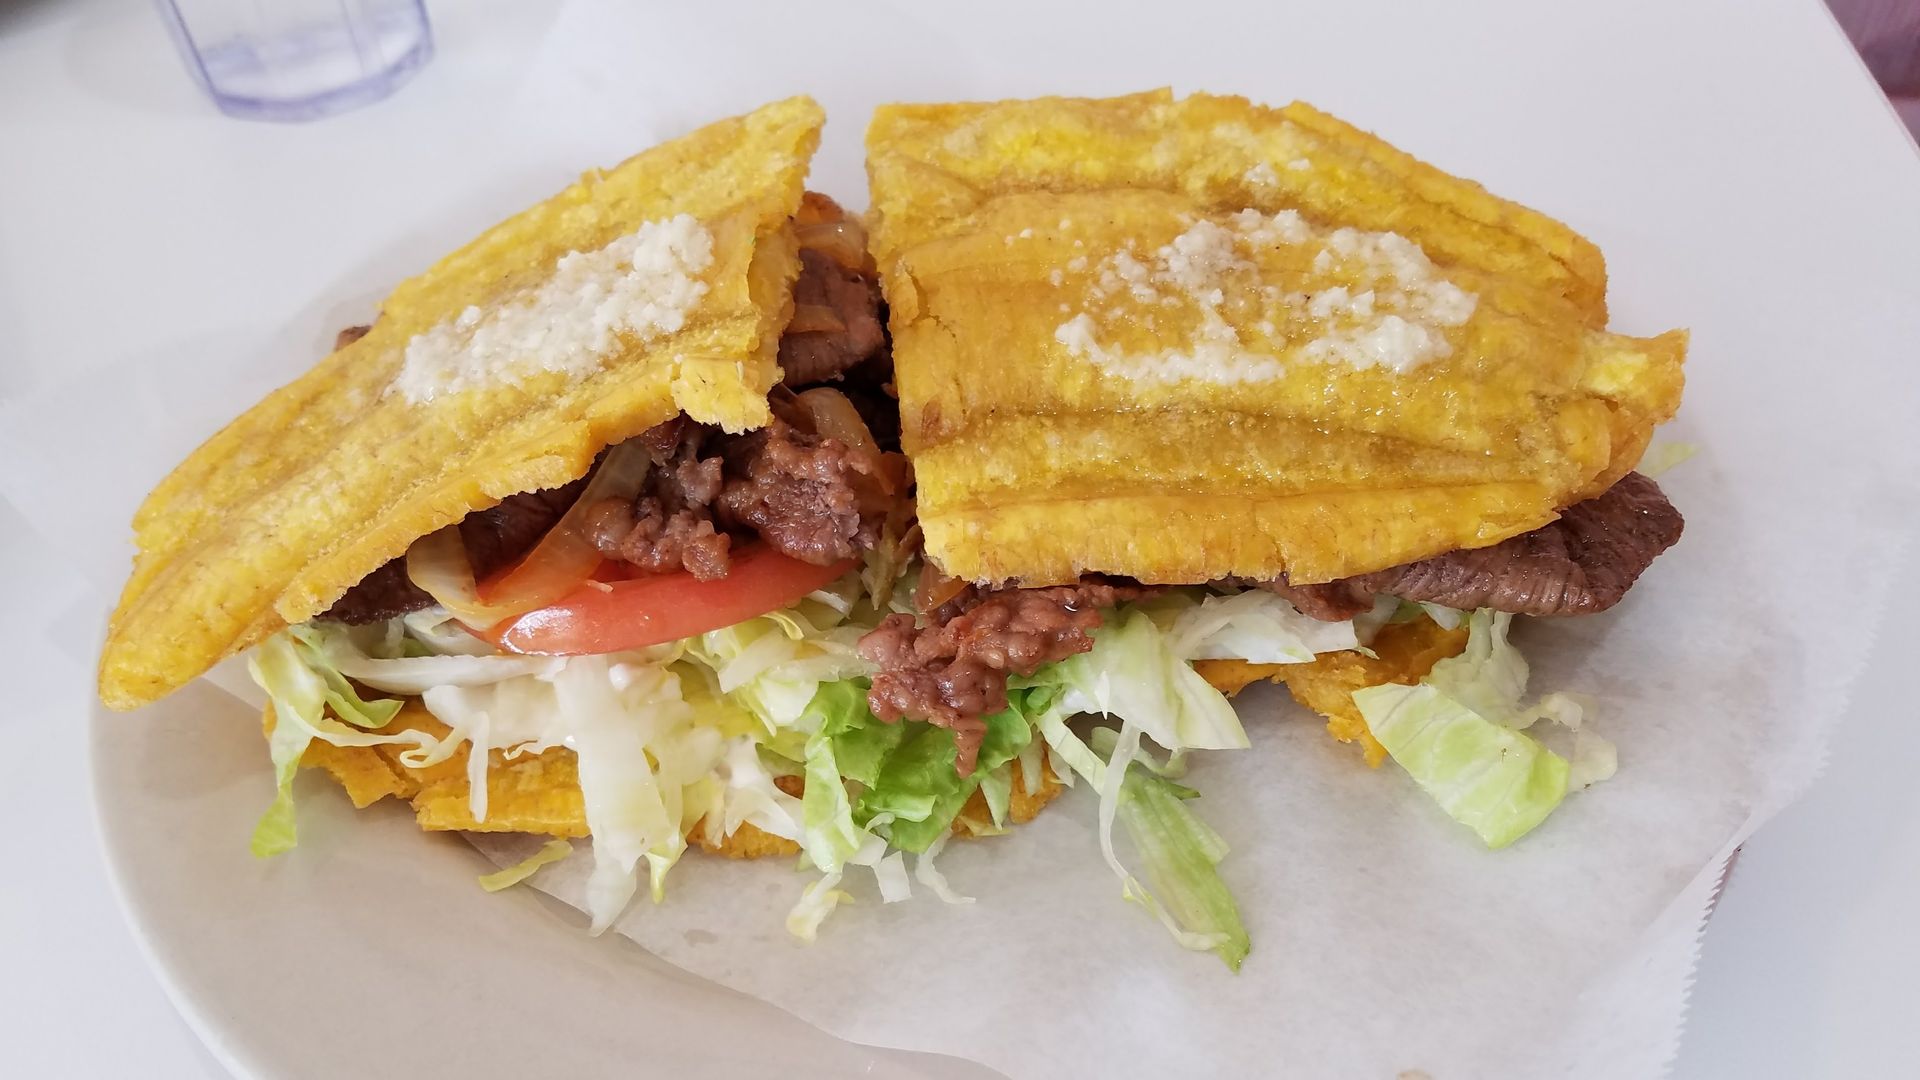 Sandwich with meat, lettuce and tomato inside slices of plaintain.